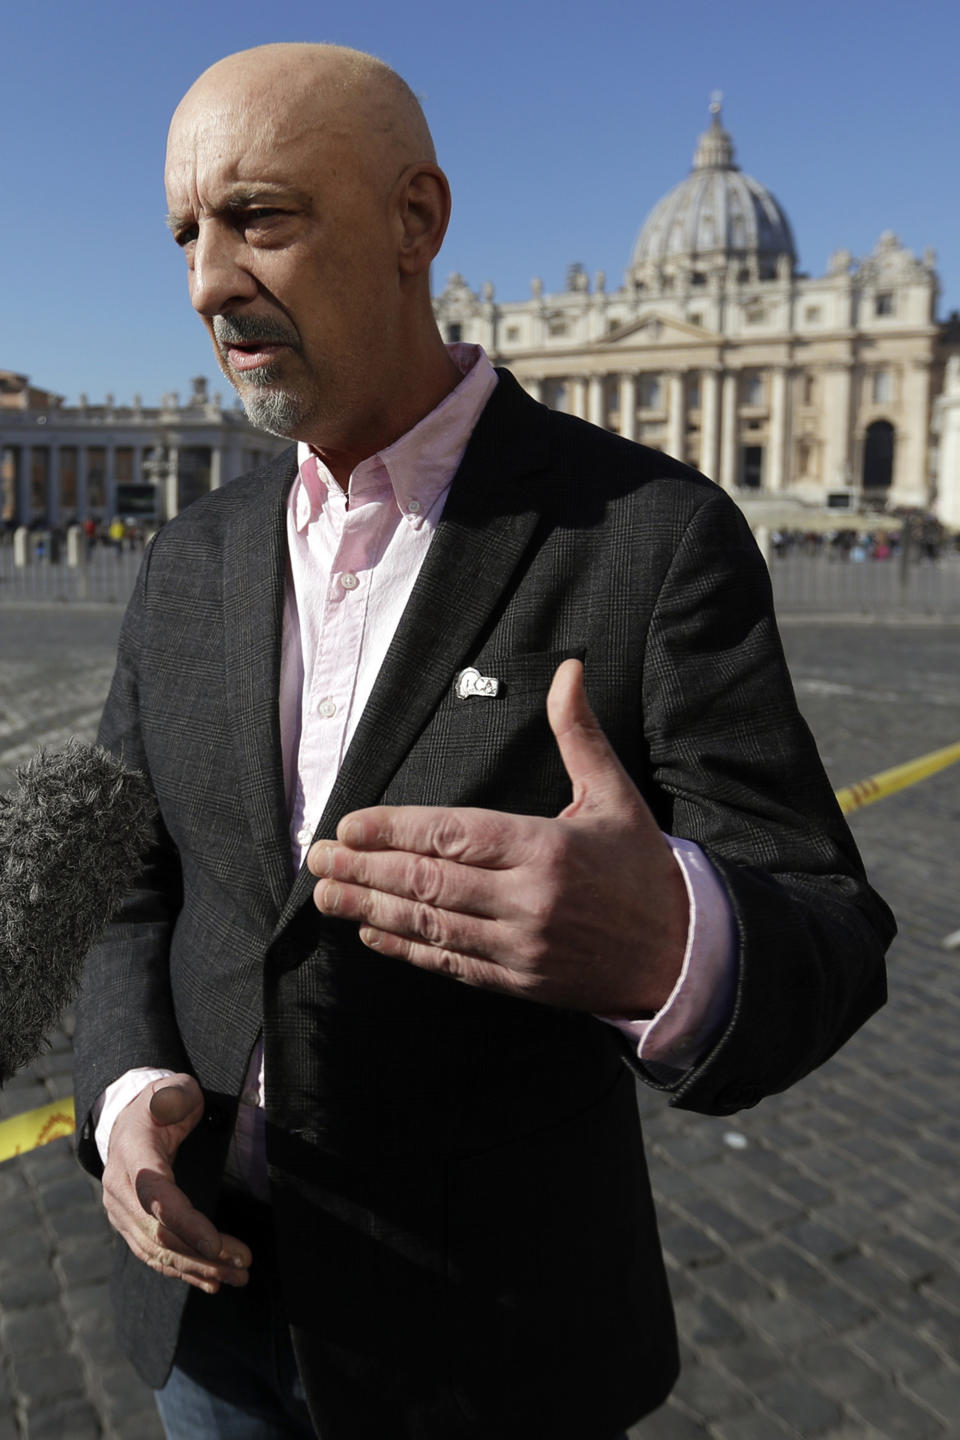 Peter Isely, founding member of the ECA (Ending Clergy Abuse) is interviewed by The Associated Press in St. Peter's Square at the Vatican, Sunday, Feb. 17, 2019. Pope Francis is asking for prayers for this week's sex abuse summit at the Vatican, calling abuse an "urgent challenge of our time", and told pilgrims and other visitors Sunday in St. Peter's Square that beginning Thursday, the heads of episcopal conferences worldwide will discuss "protection of minors in the church." (AP Photo/Gregorio Borgia)